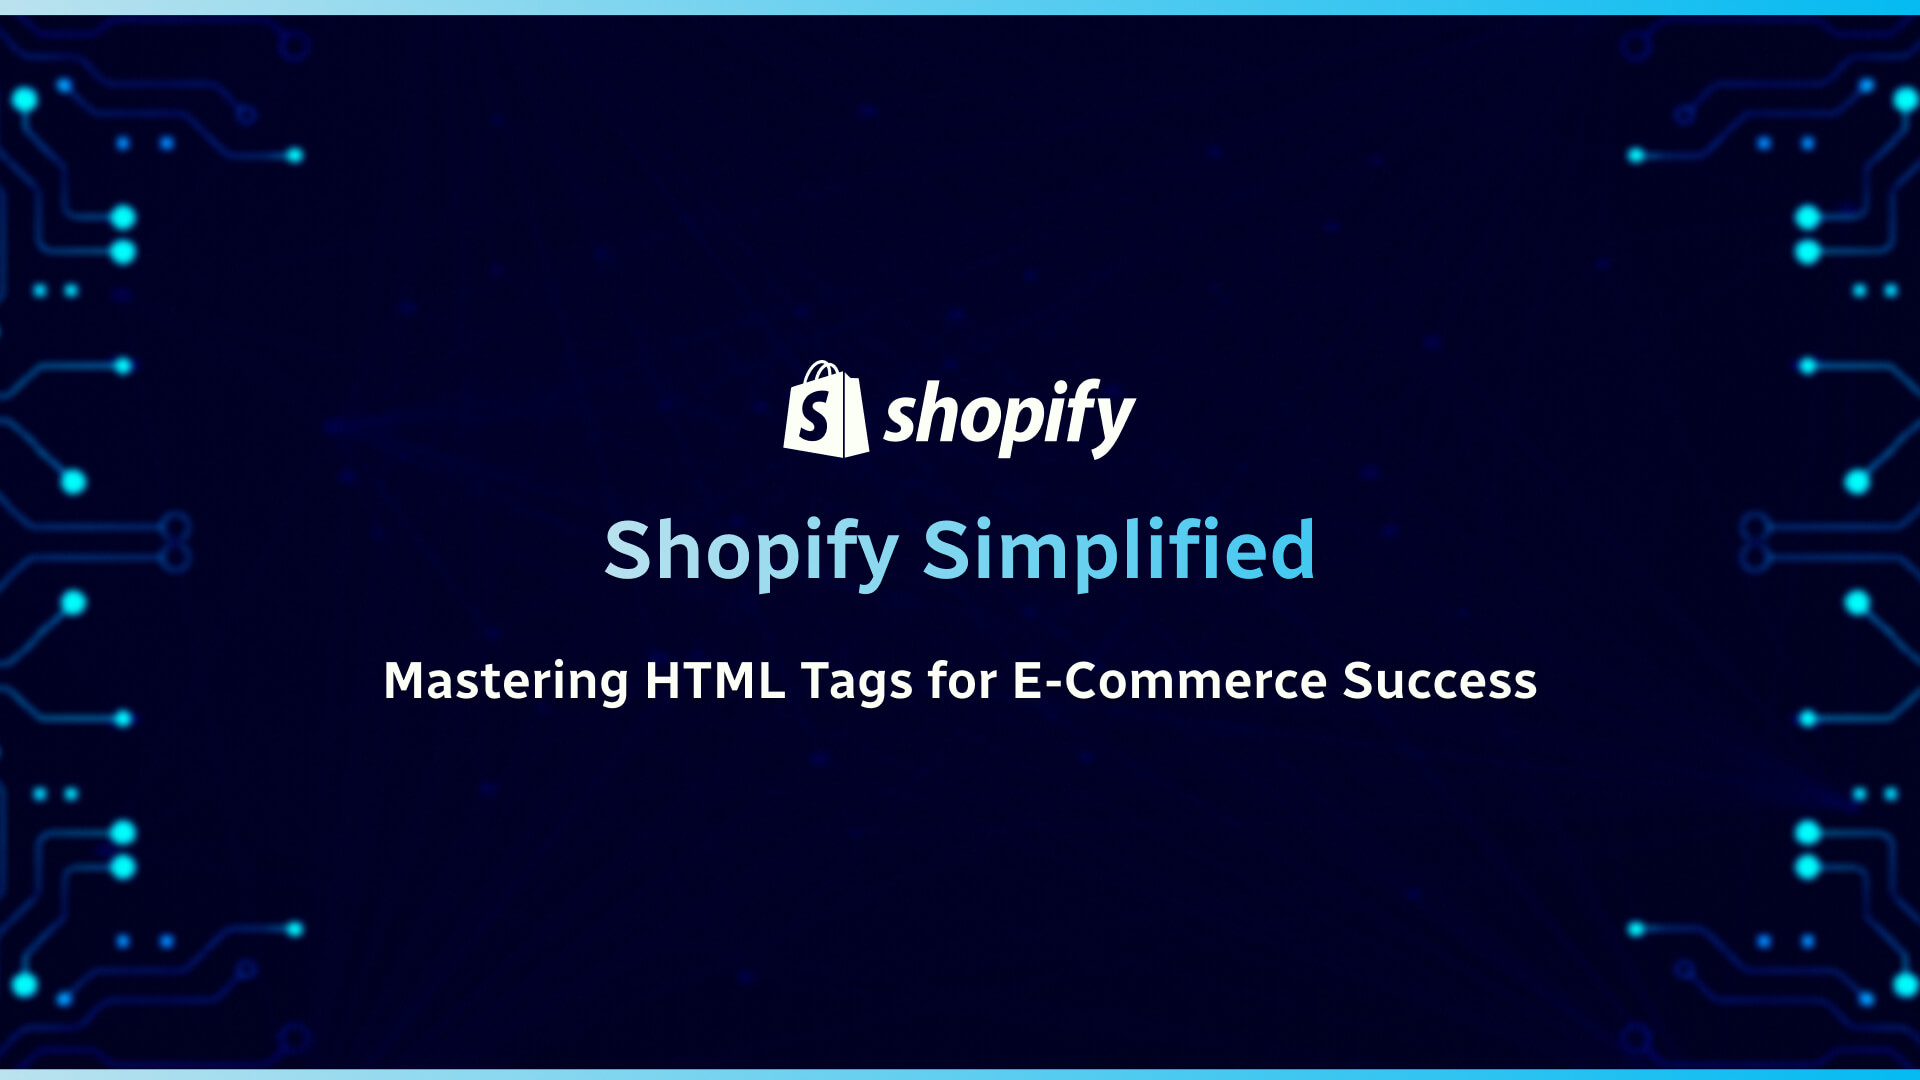 Shopify Simplified: Mastering HTML Tags for E-Commerce Success